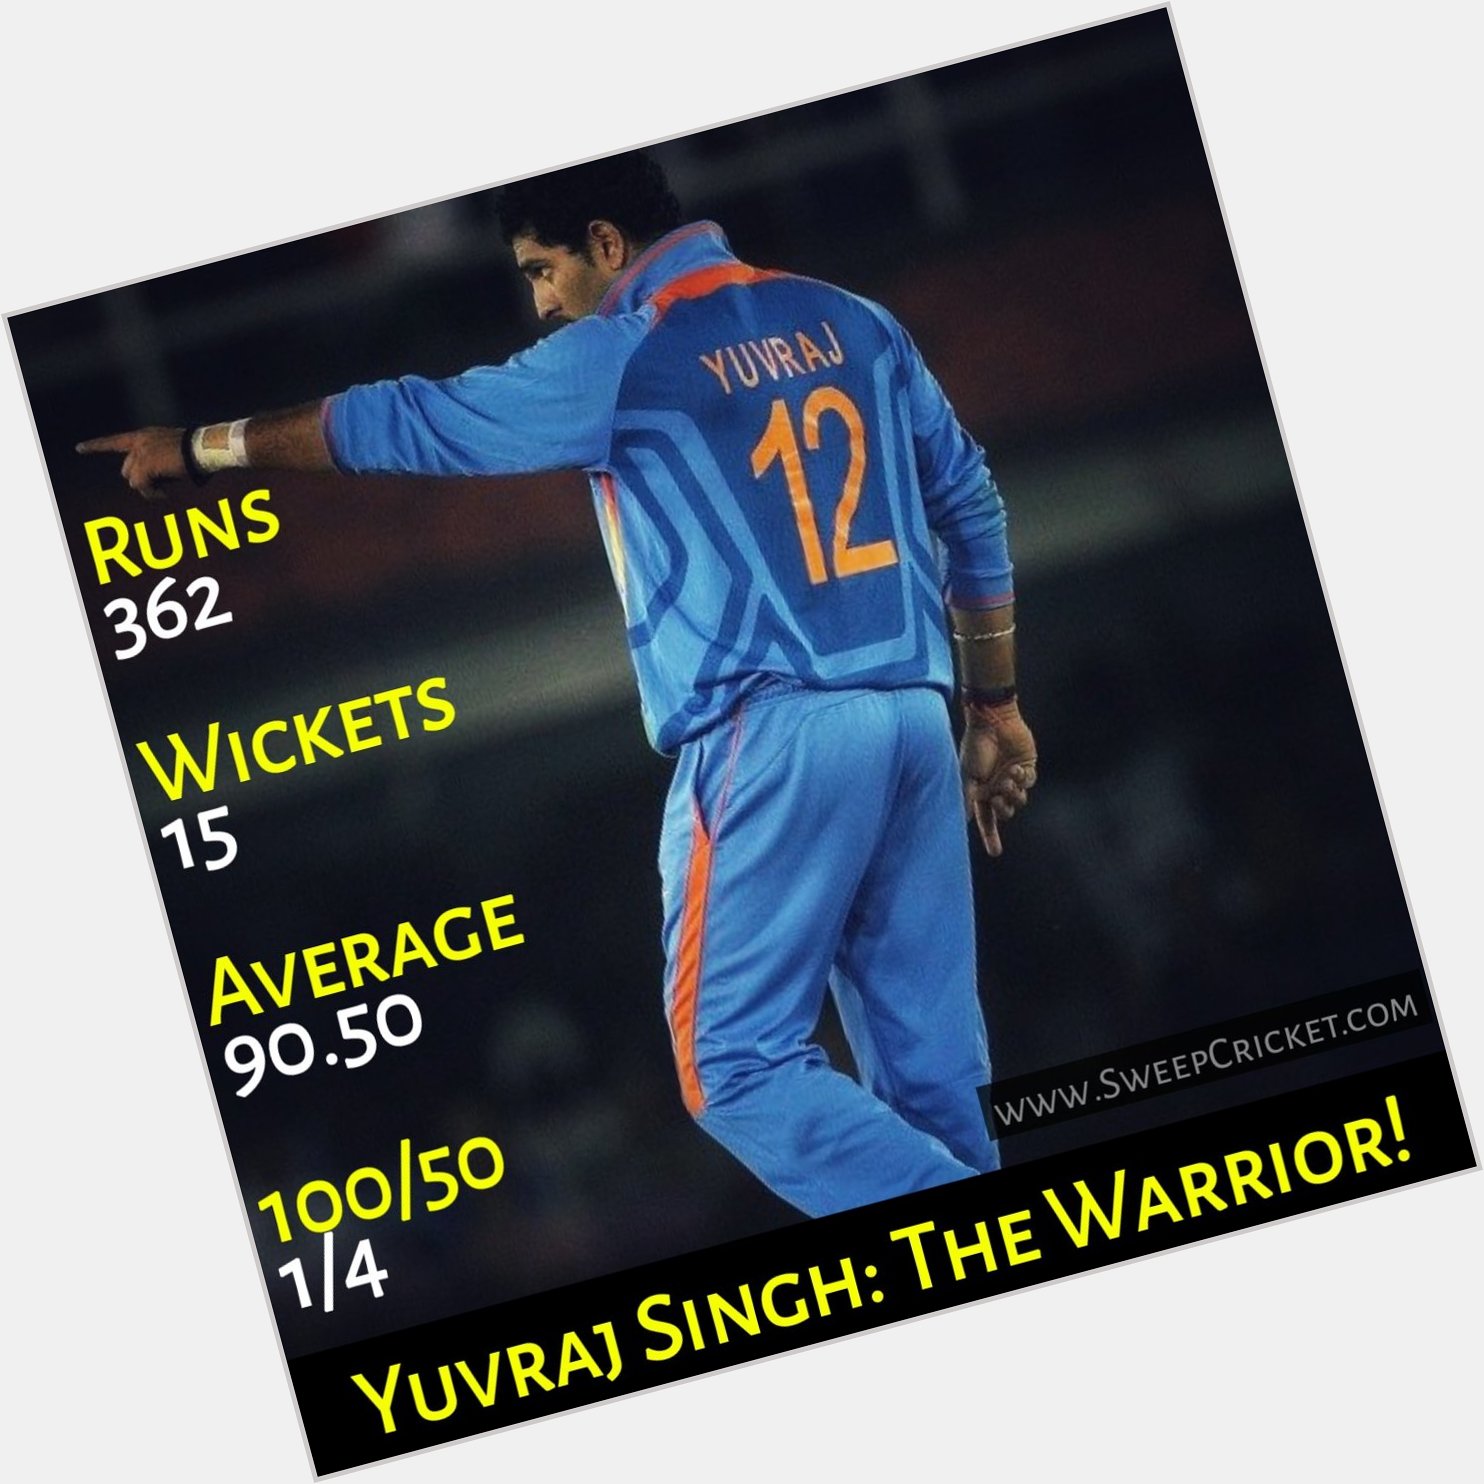 Yuvraj Singh\s Man of Tournament performance in 2011 World Cup! A very Happy Birthday Champion. 